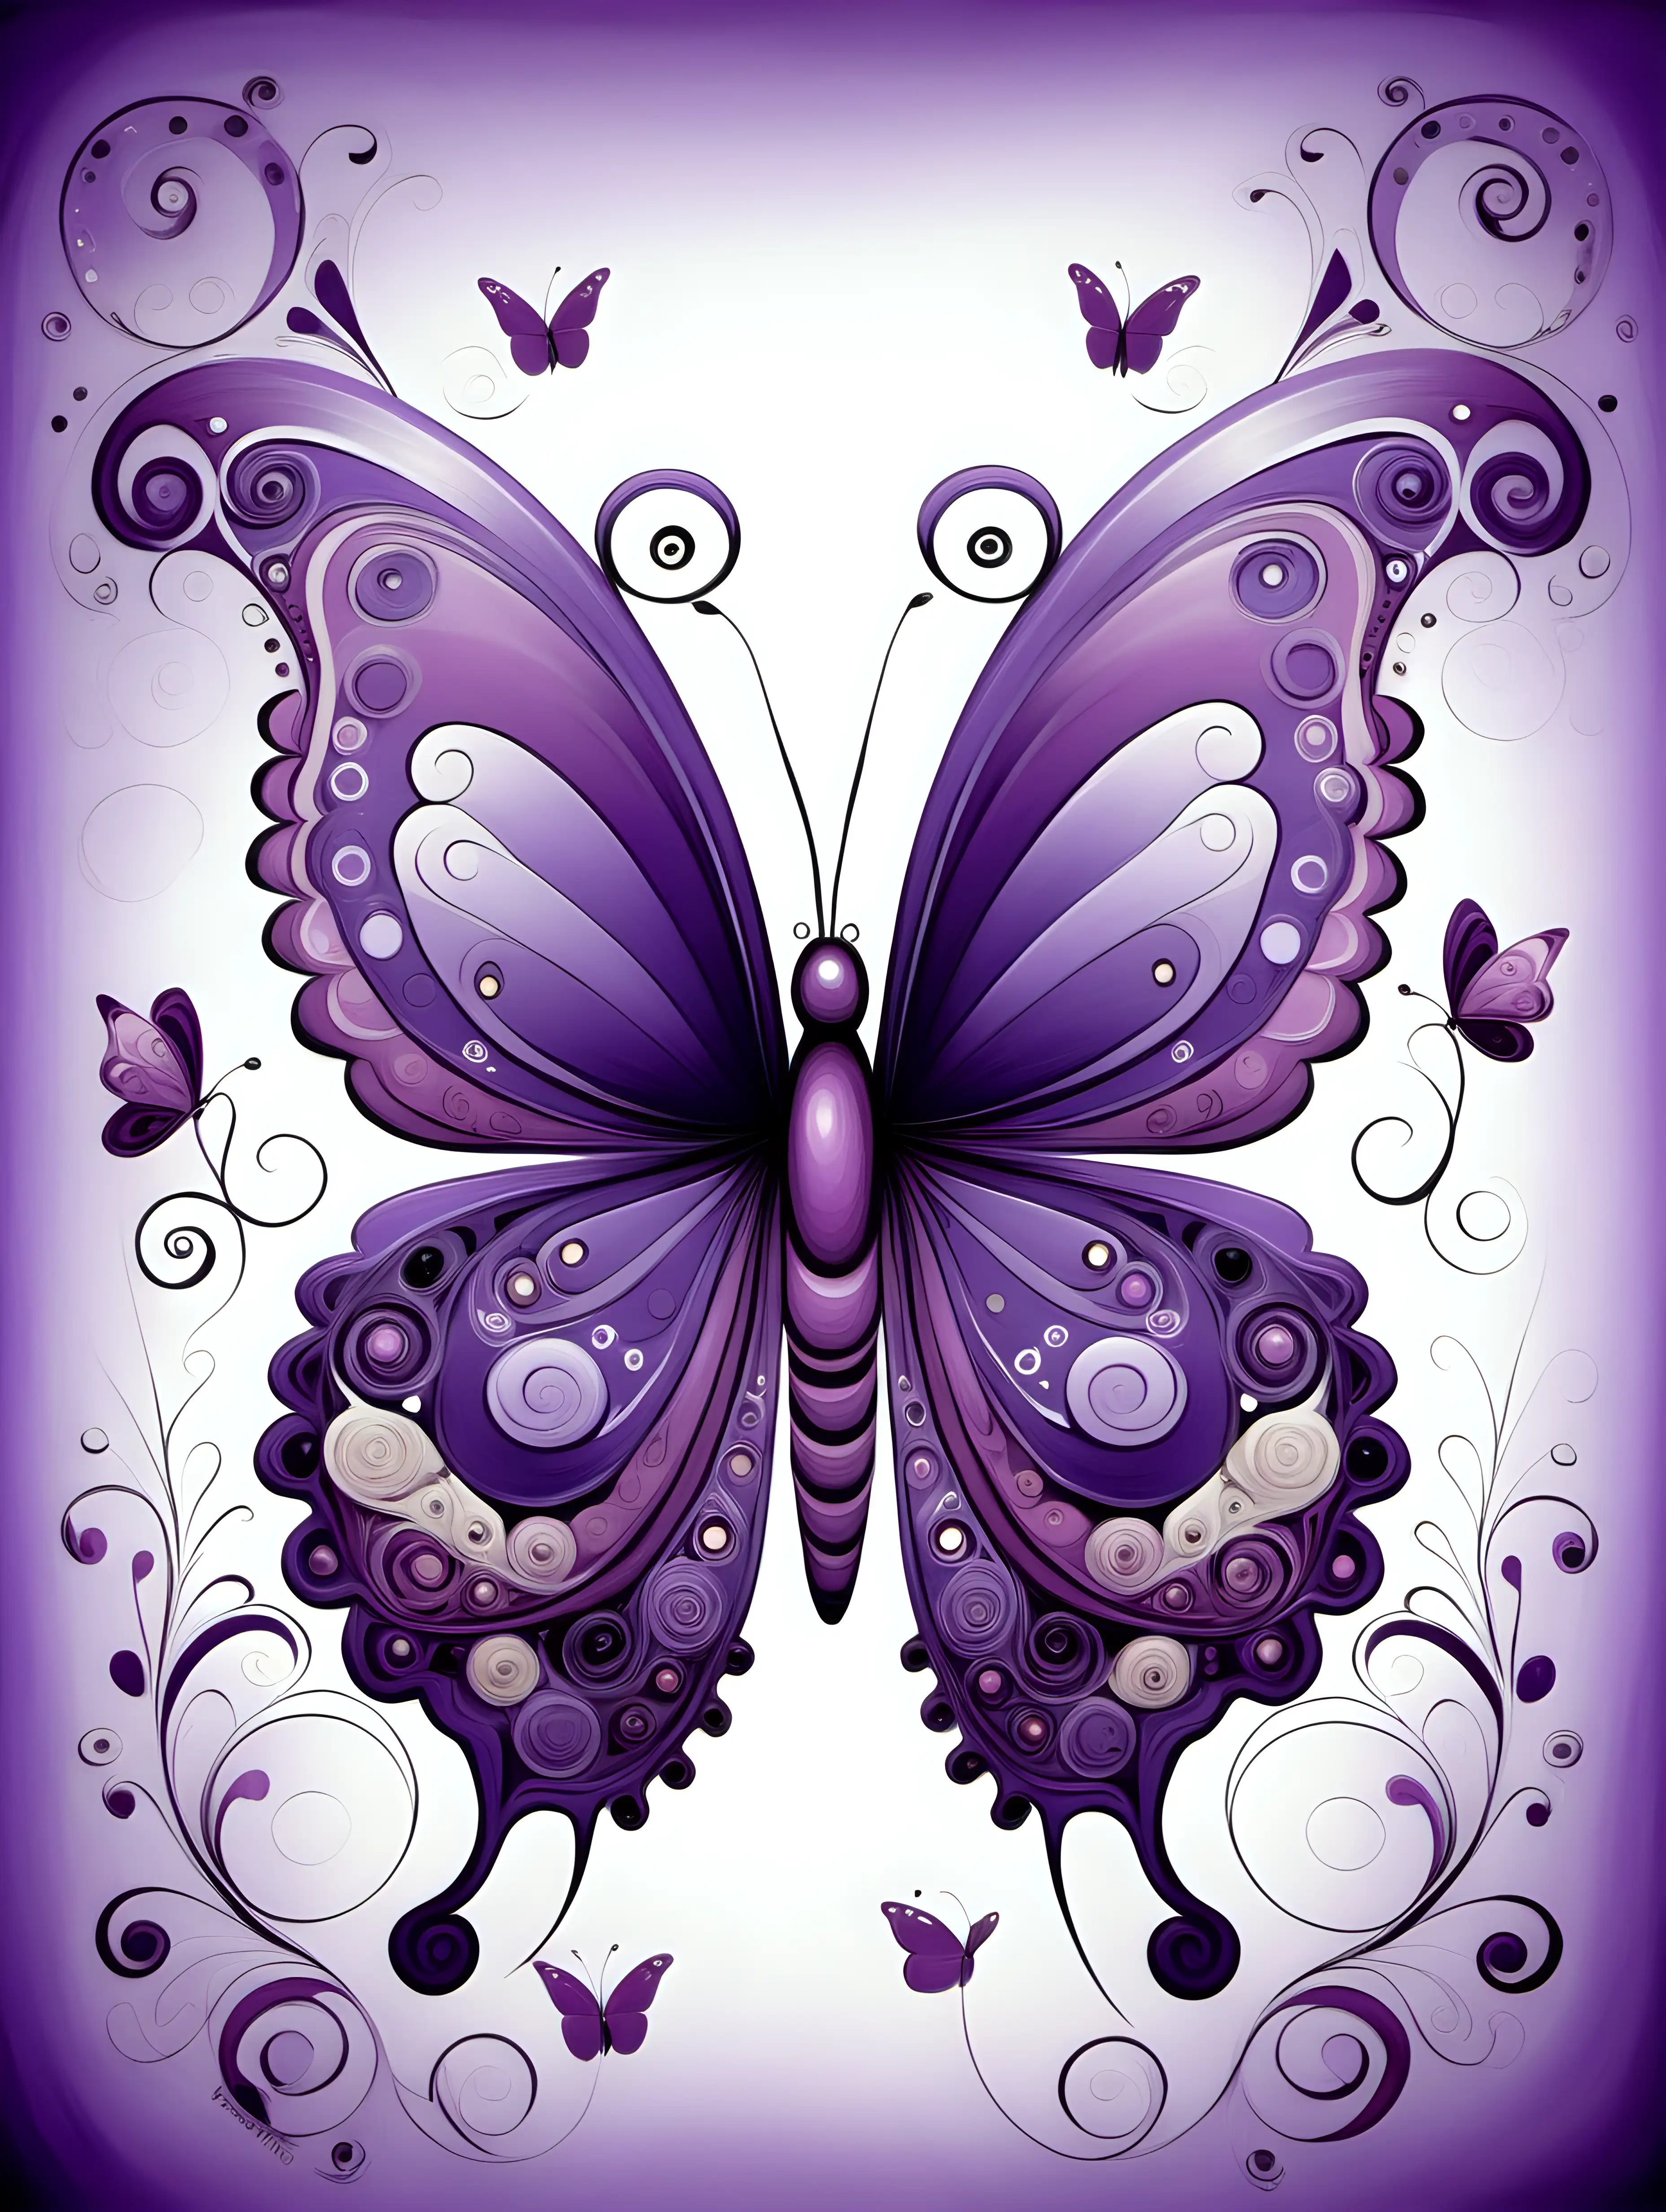 Colorful Whimsical Butterfly Art in Shades of Purple